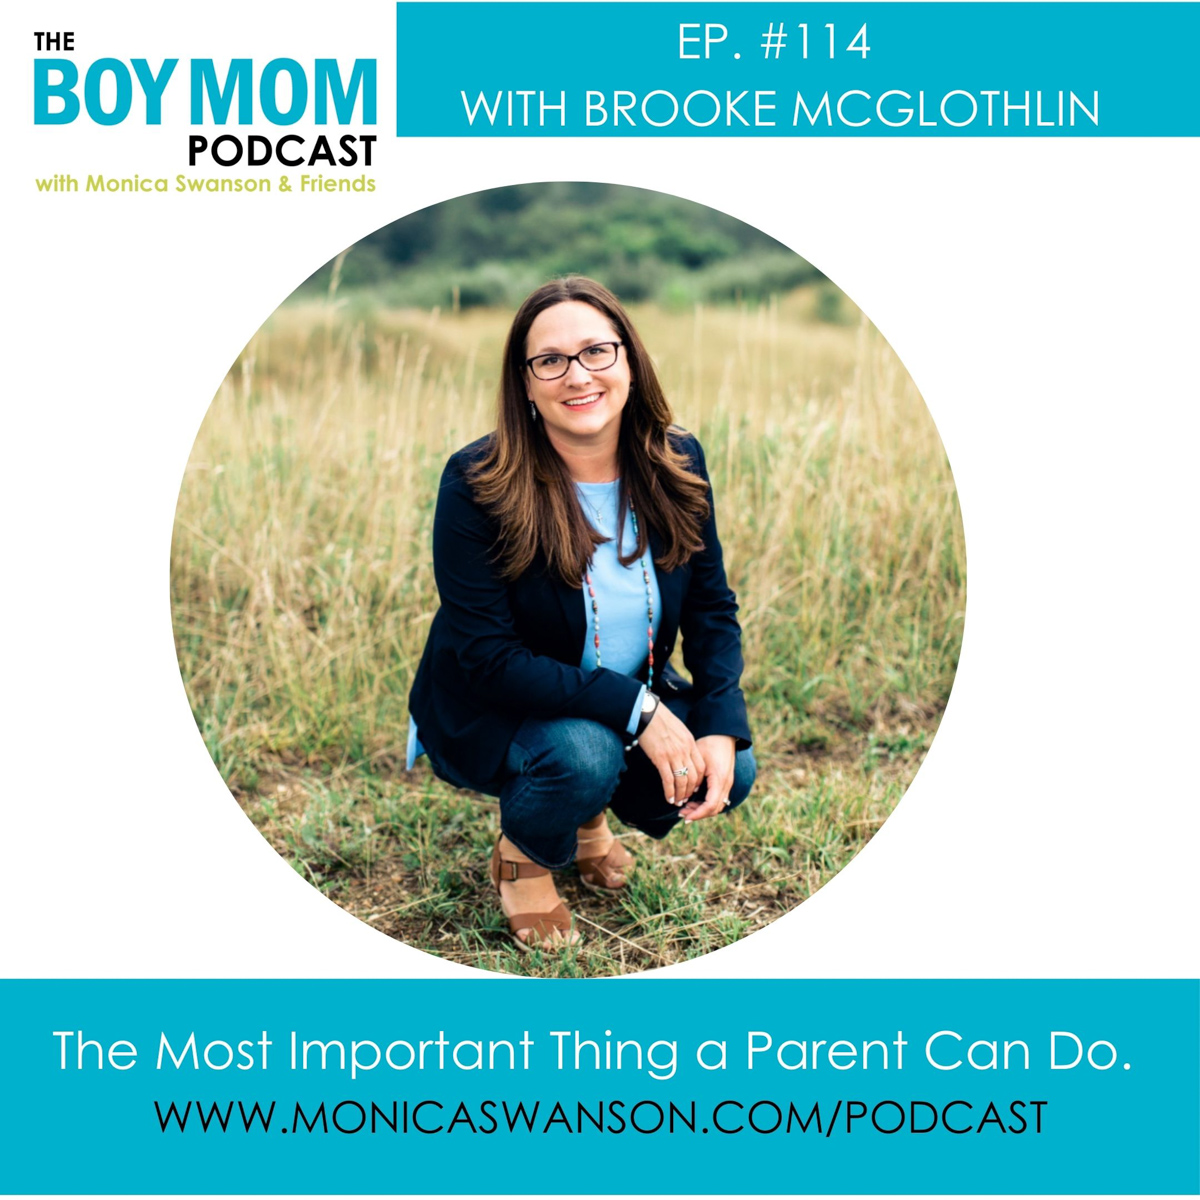 The Most Important Thing a Parent Can Do {Episode 114 with Brooke McGlothlin}